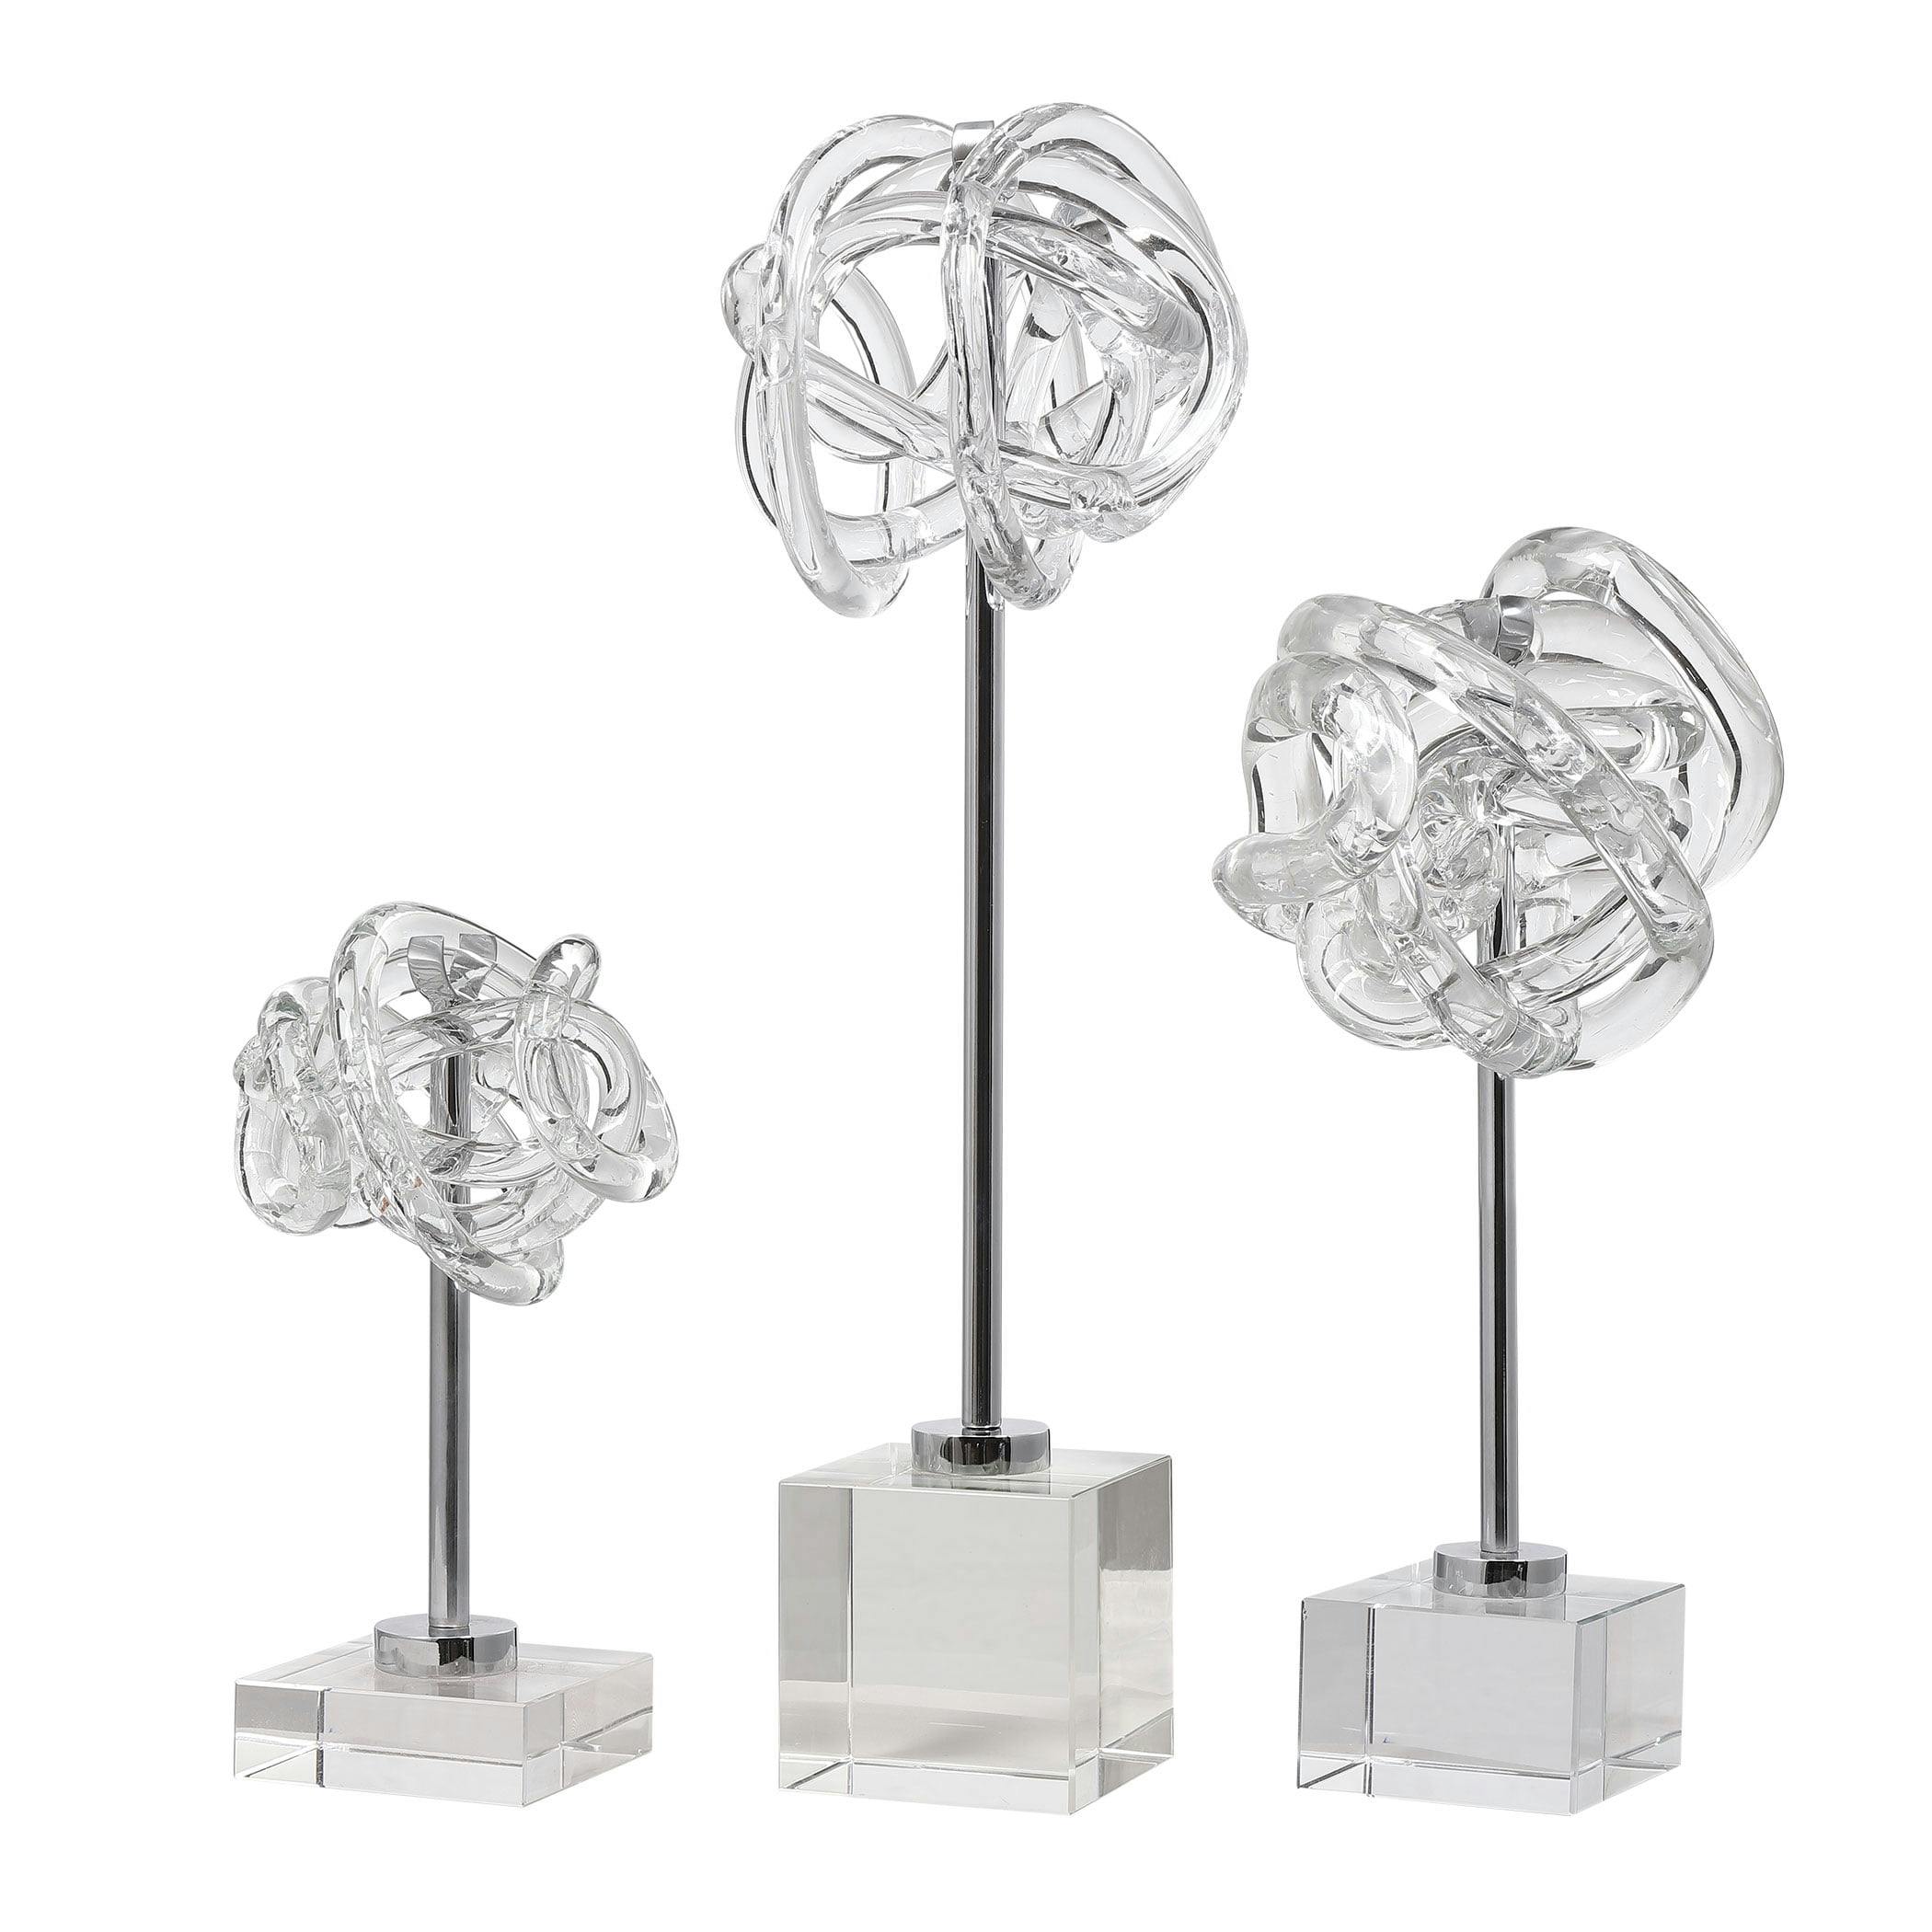 Contemporary Neuron Glass Sculptures with Polished Nickel Base - Set of 3